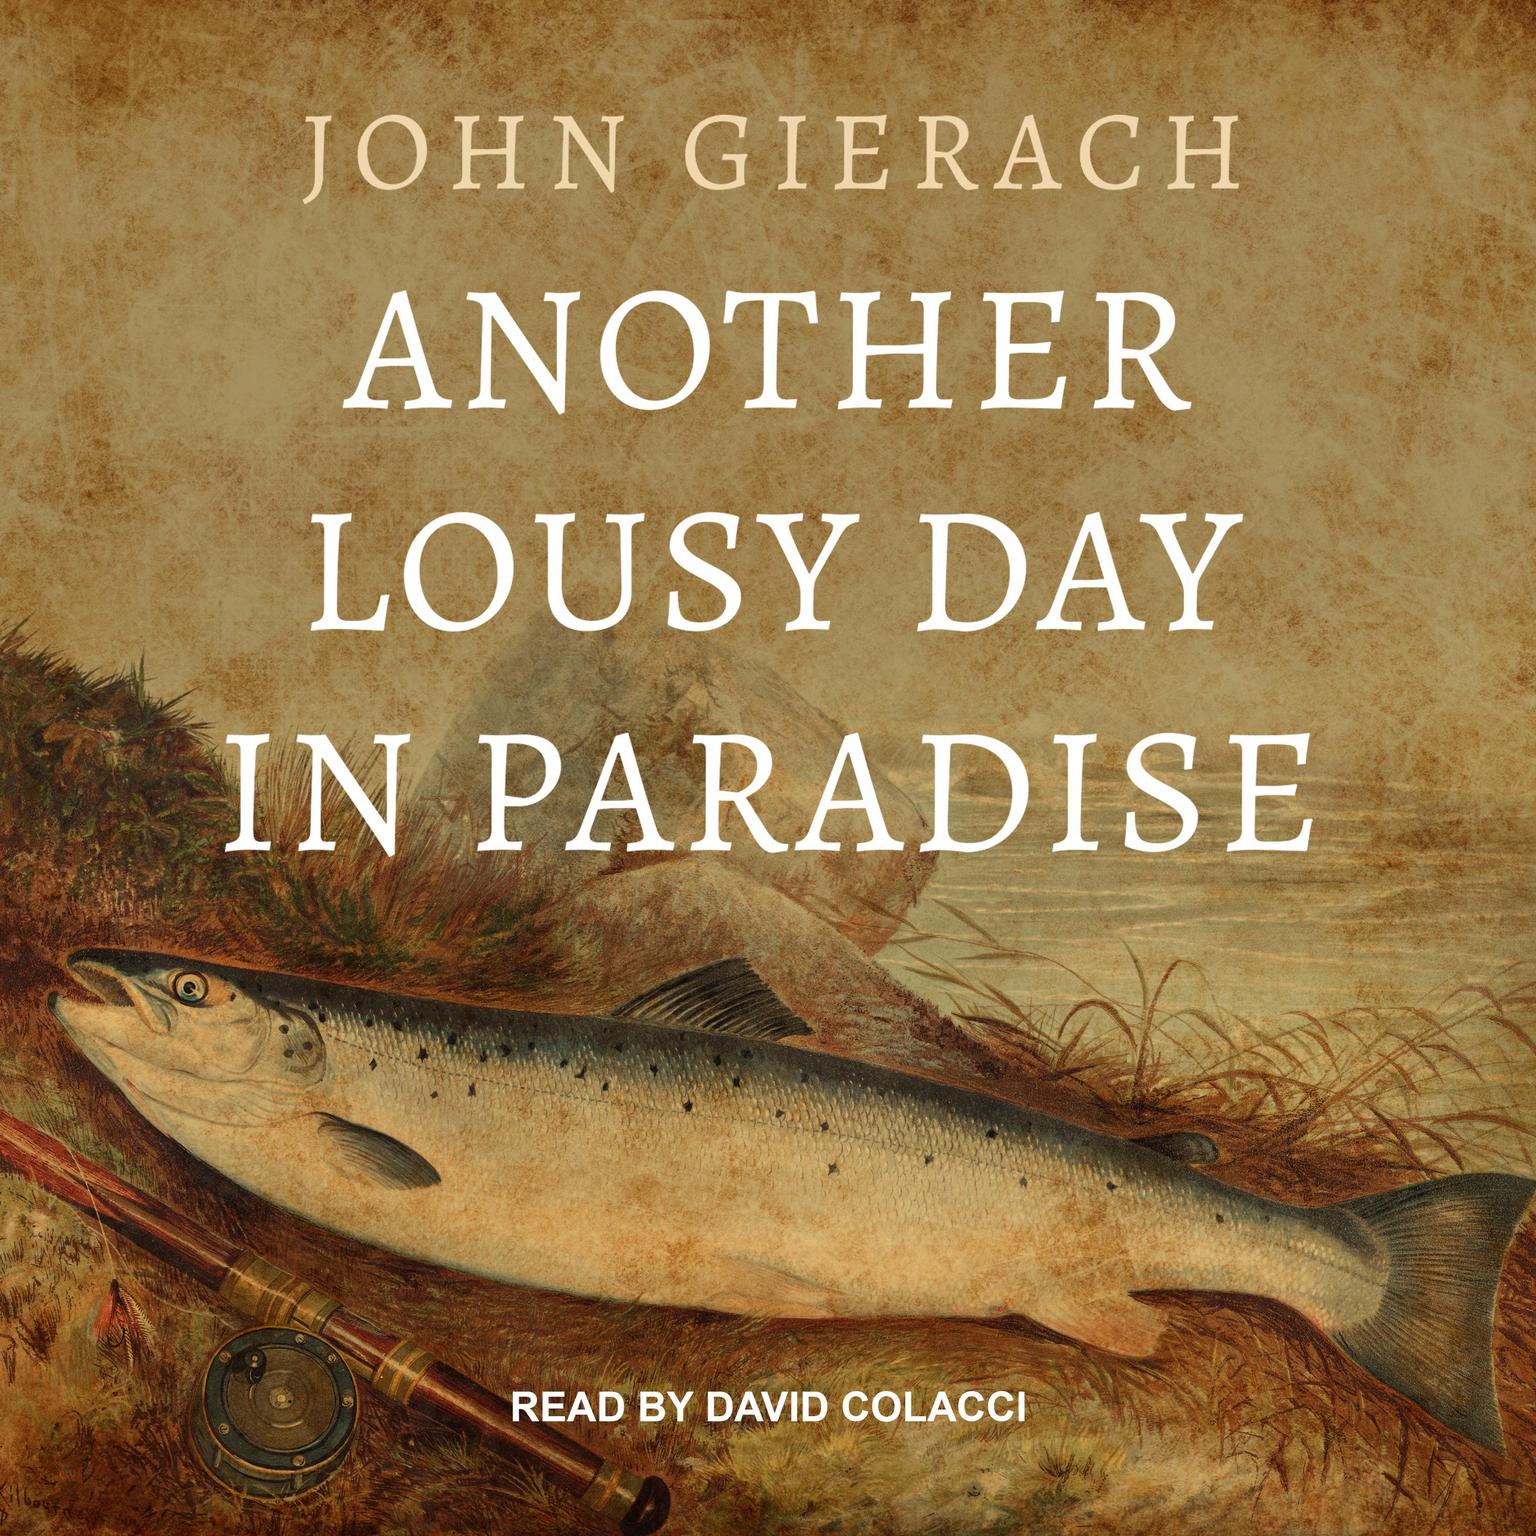 Another Lousy Day in Paradise Audiobook, by John Gierach